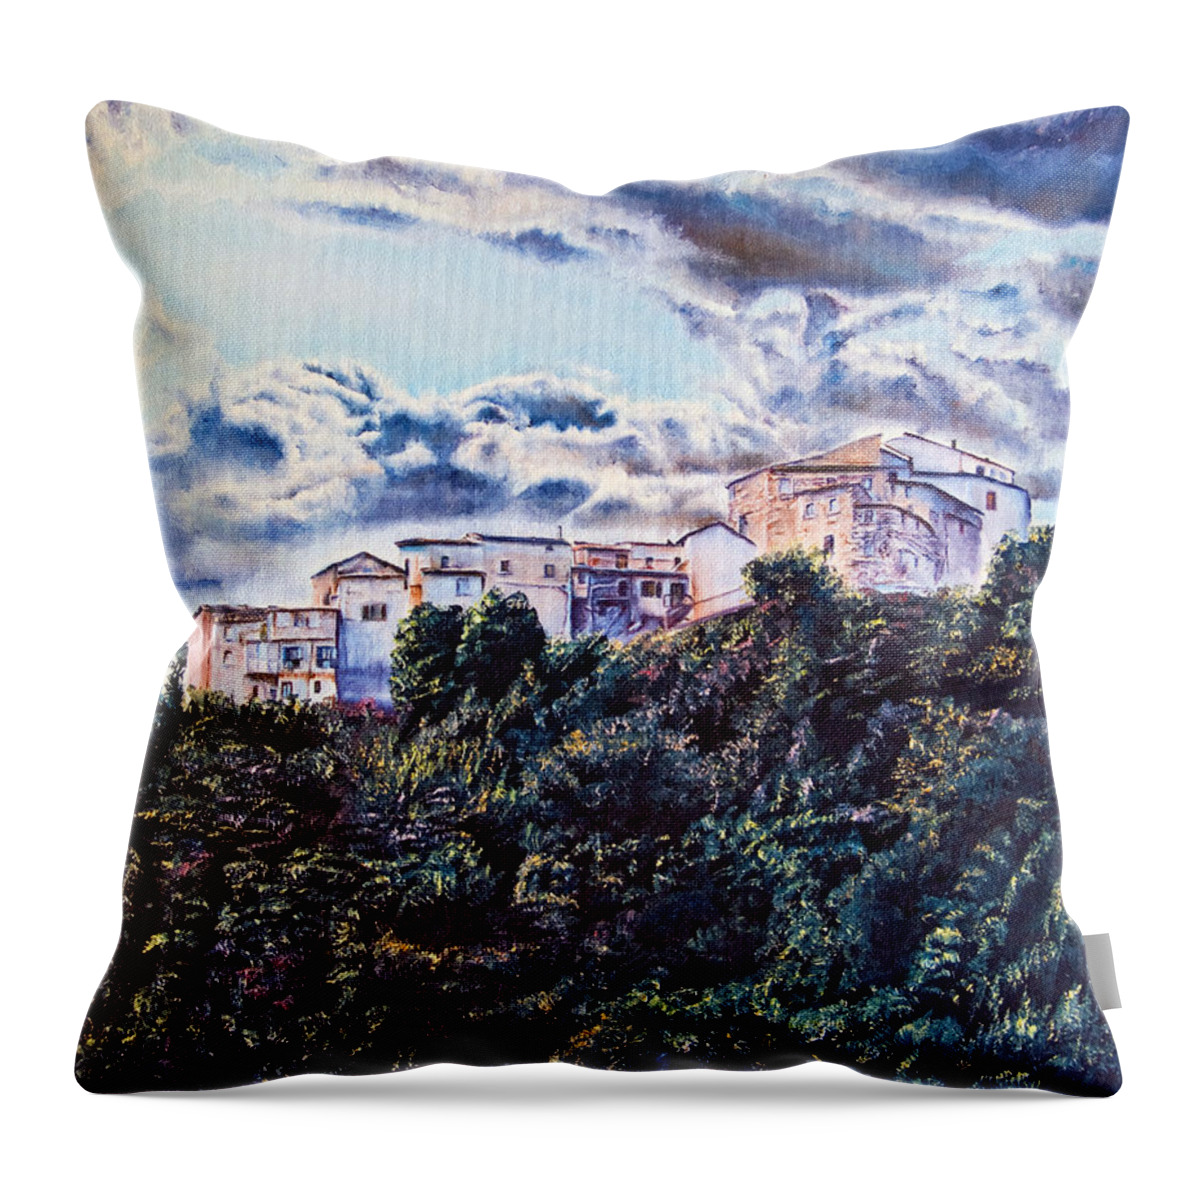 Skies Throw Pillow featuring the painting Small Village by Michelangelo Rossi